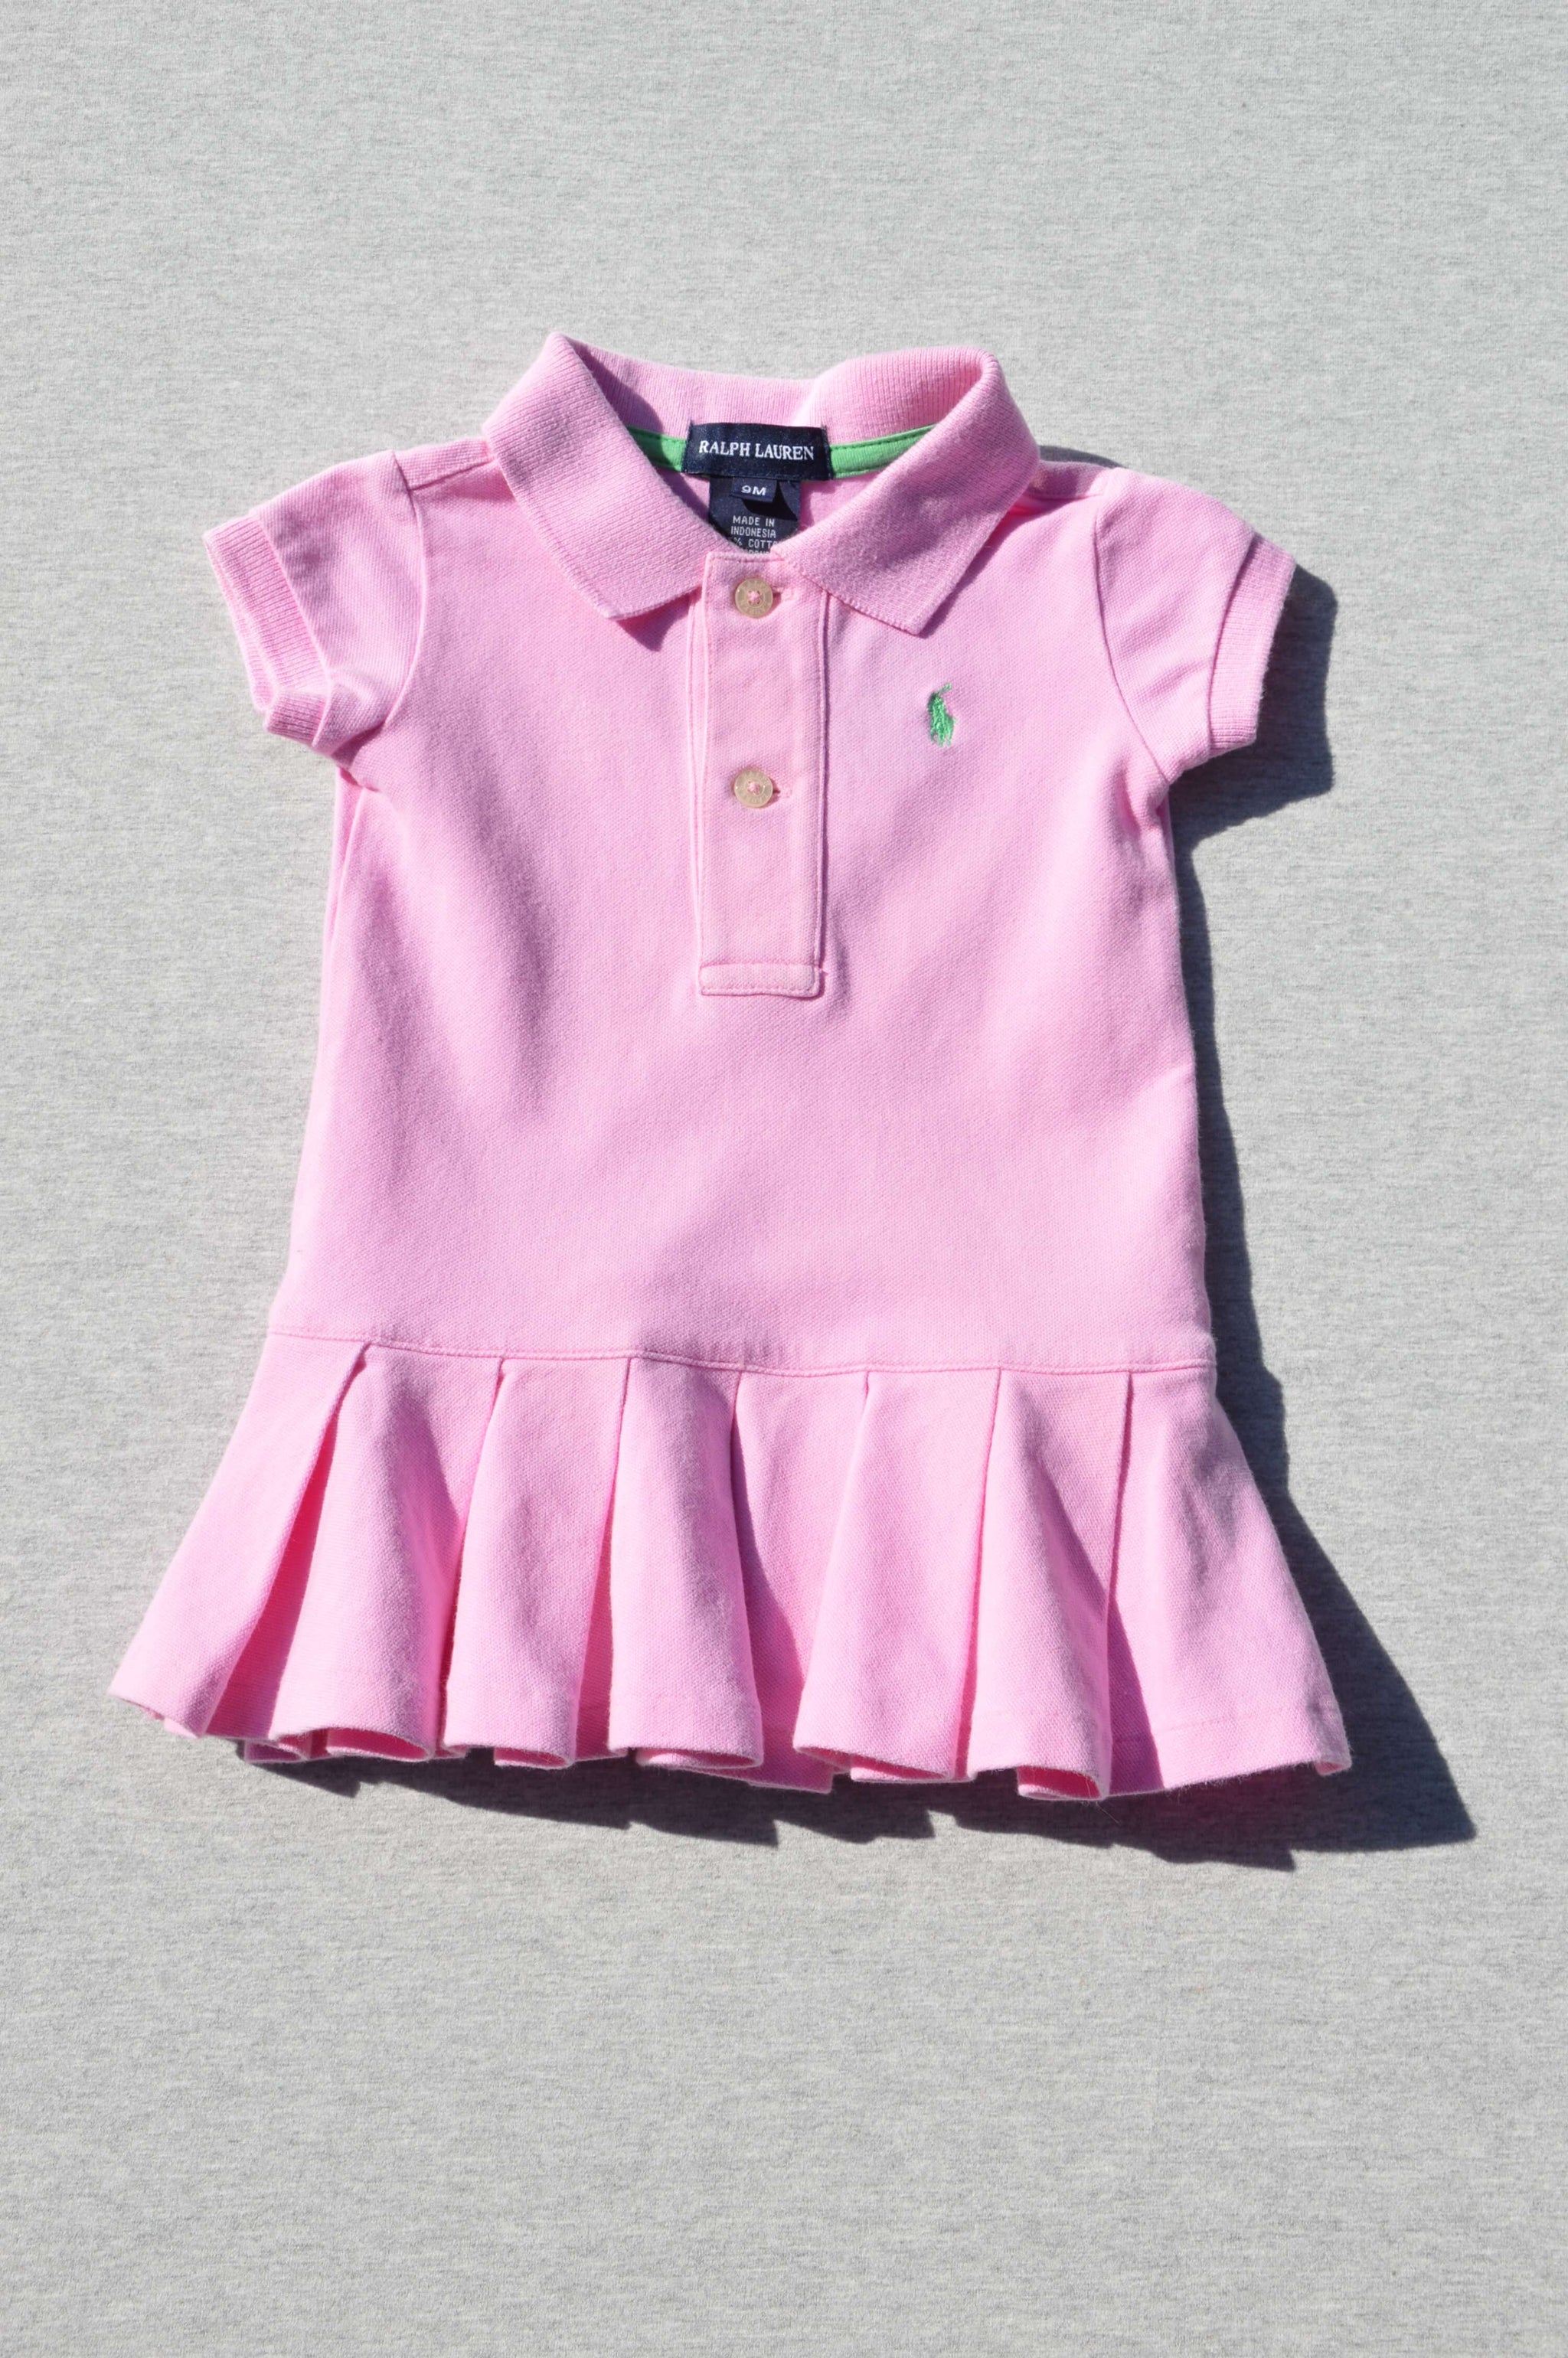 Ralph Lauren - nearly new - pink polo dress, size 9m - Charlie & Flo's